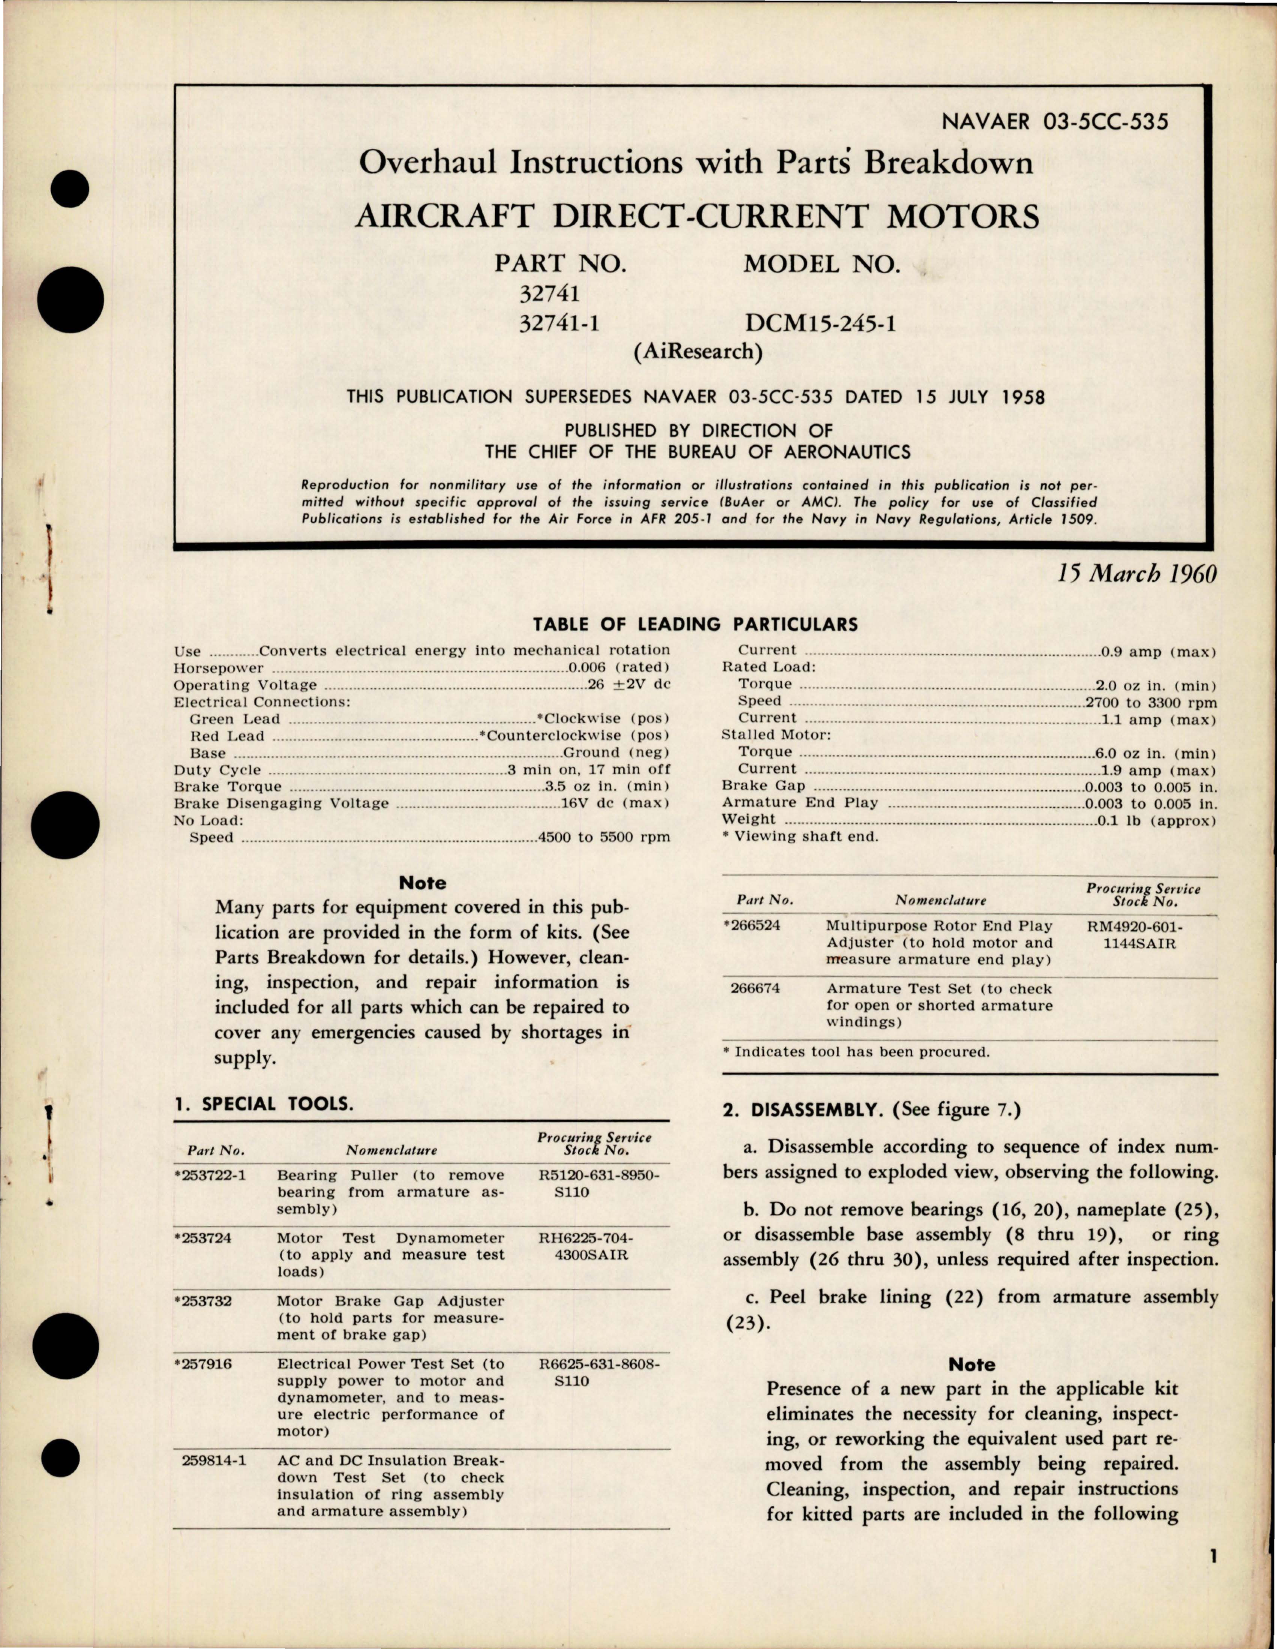 Sample page 1 from AirCorps Library document: Overhaul Instructions with Parts Breakdown for Aircraft Direct Current Motors - Parts 32741 and 32741-1 - Model DCM15-245-1